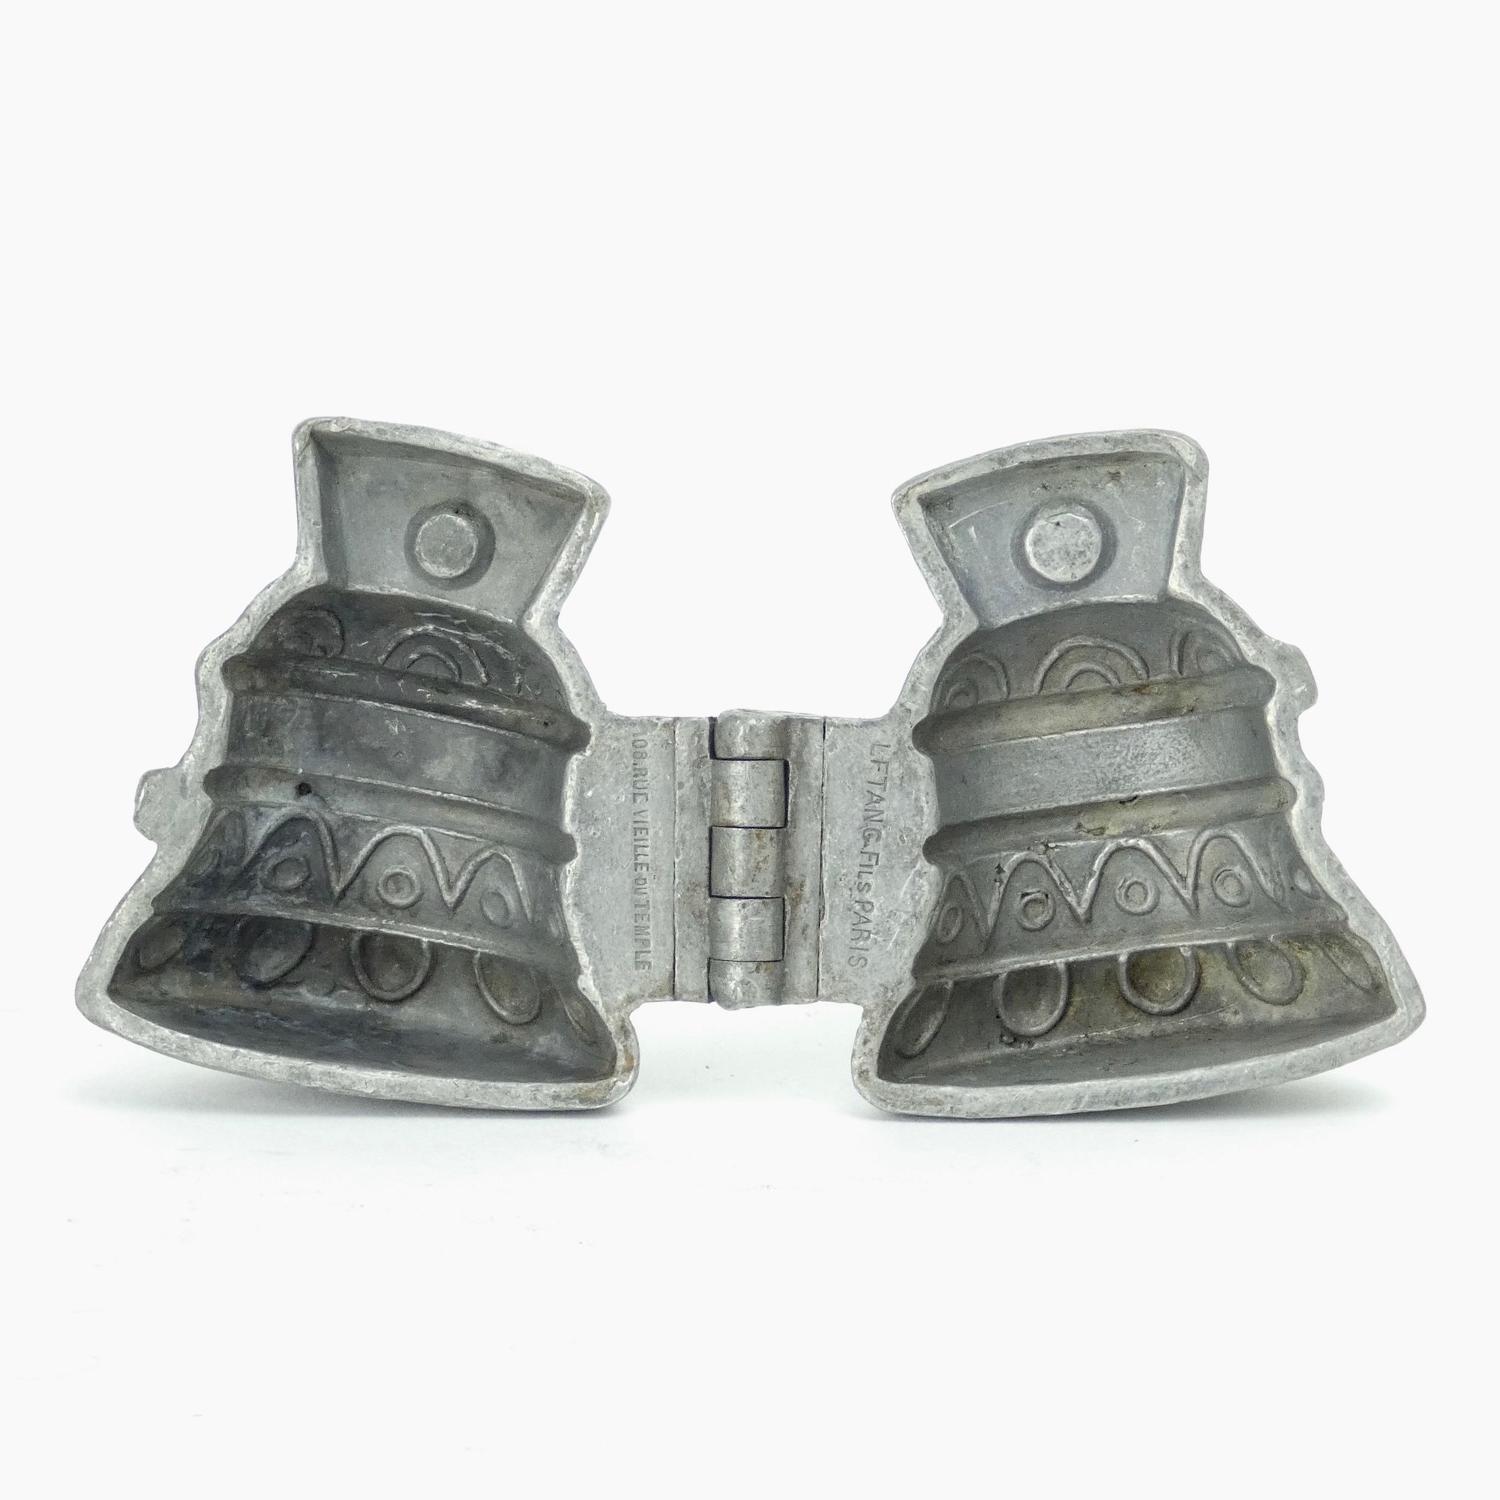 Pewter bell mould.